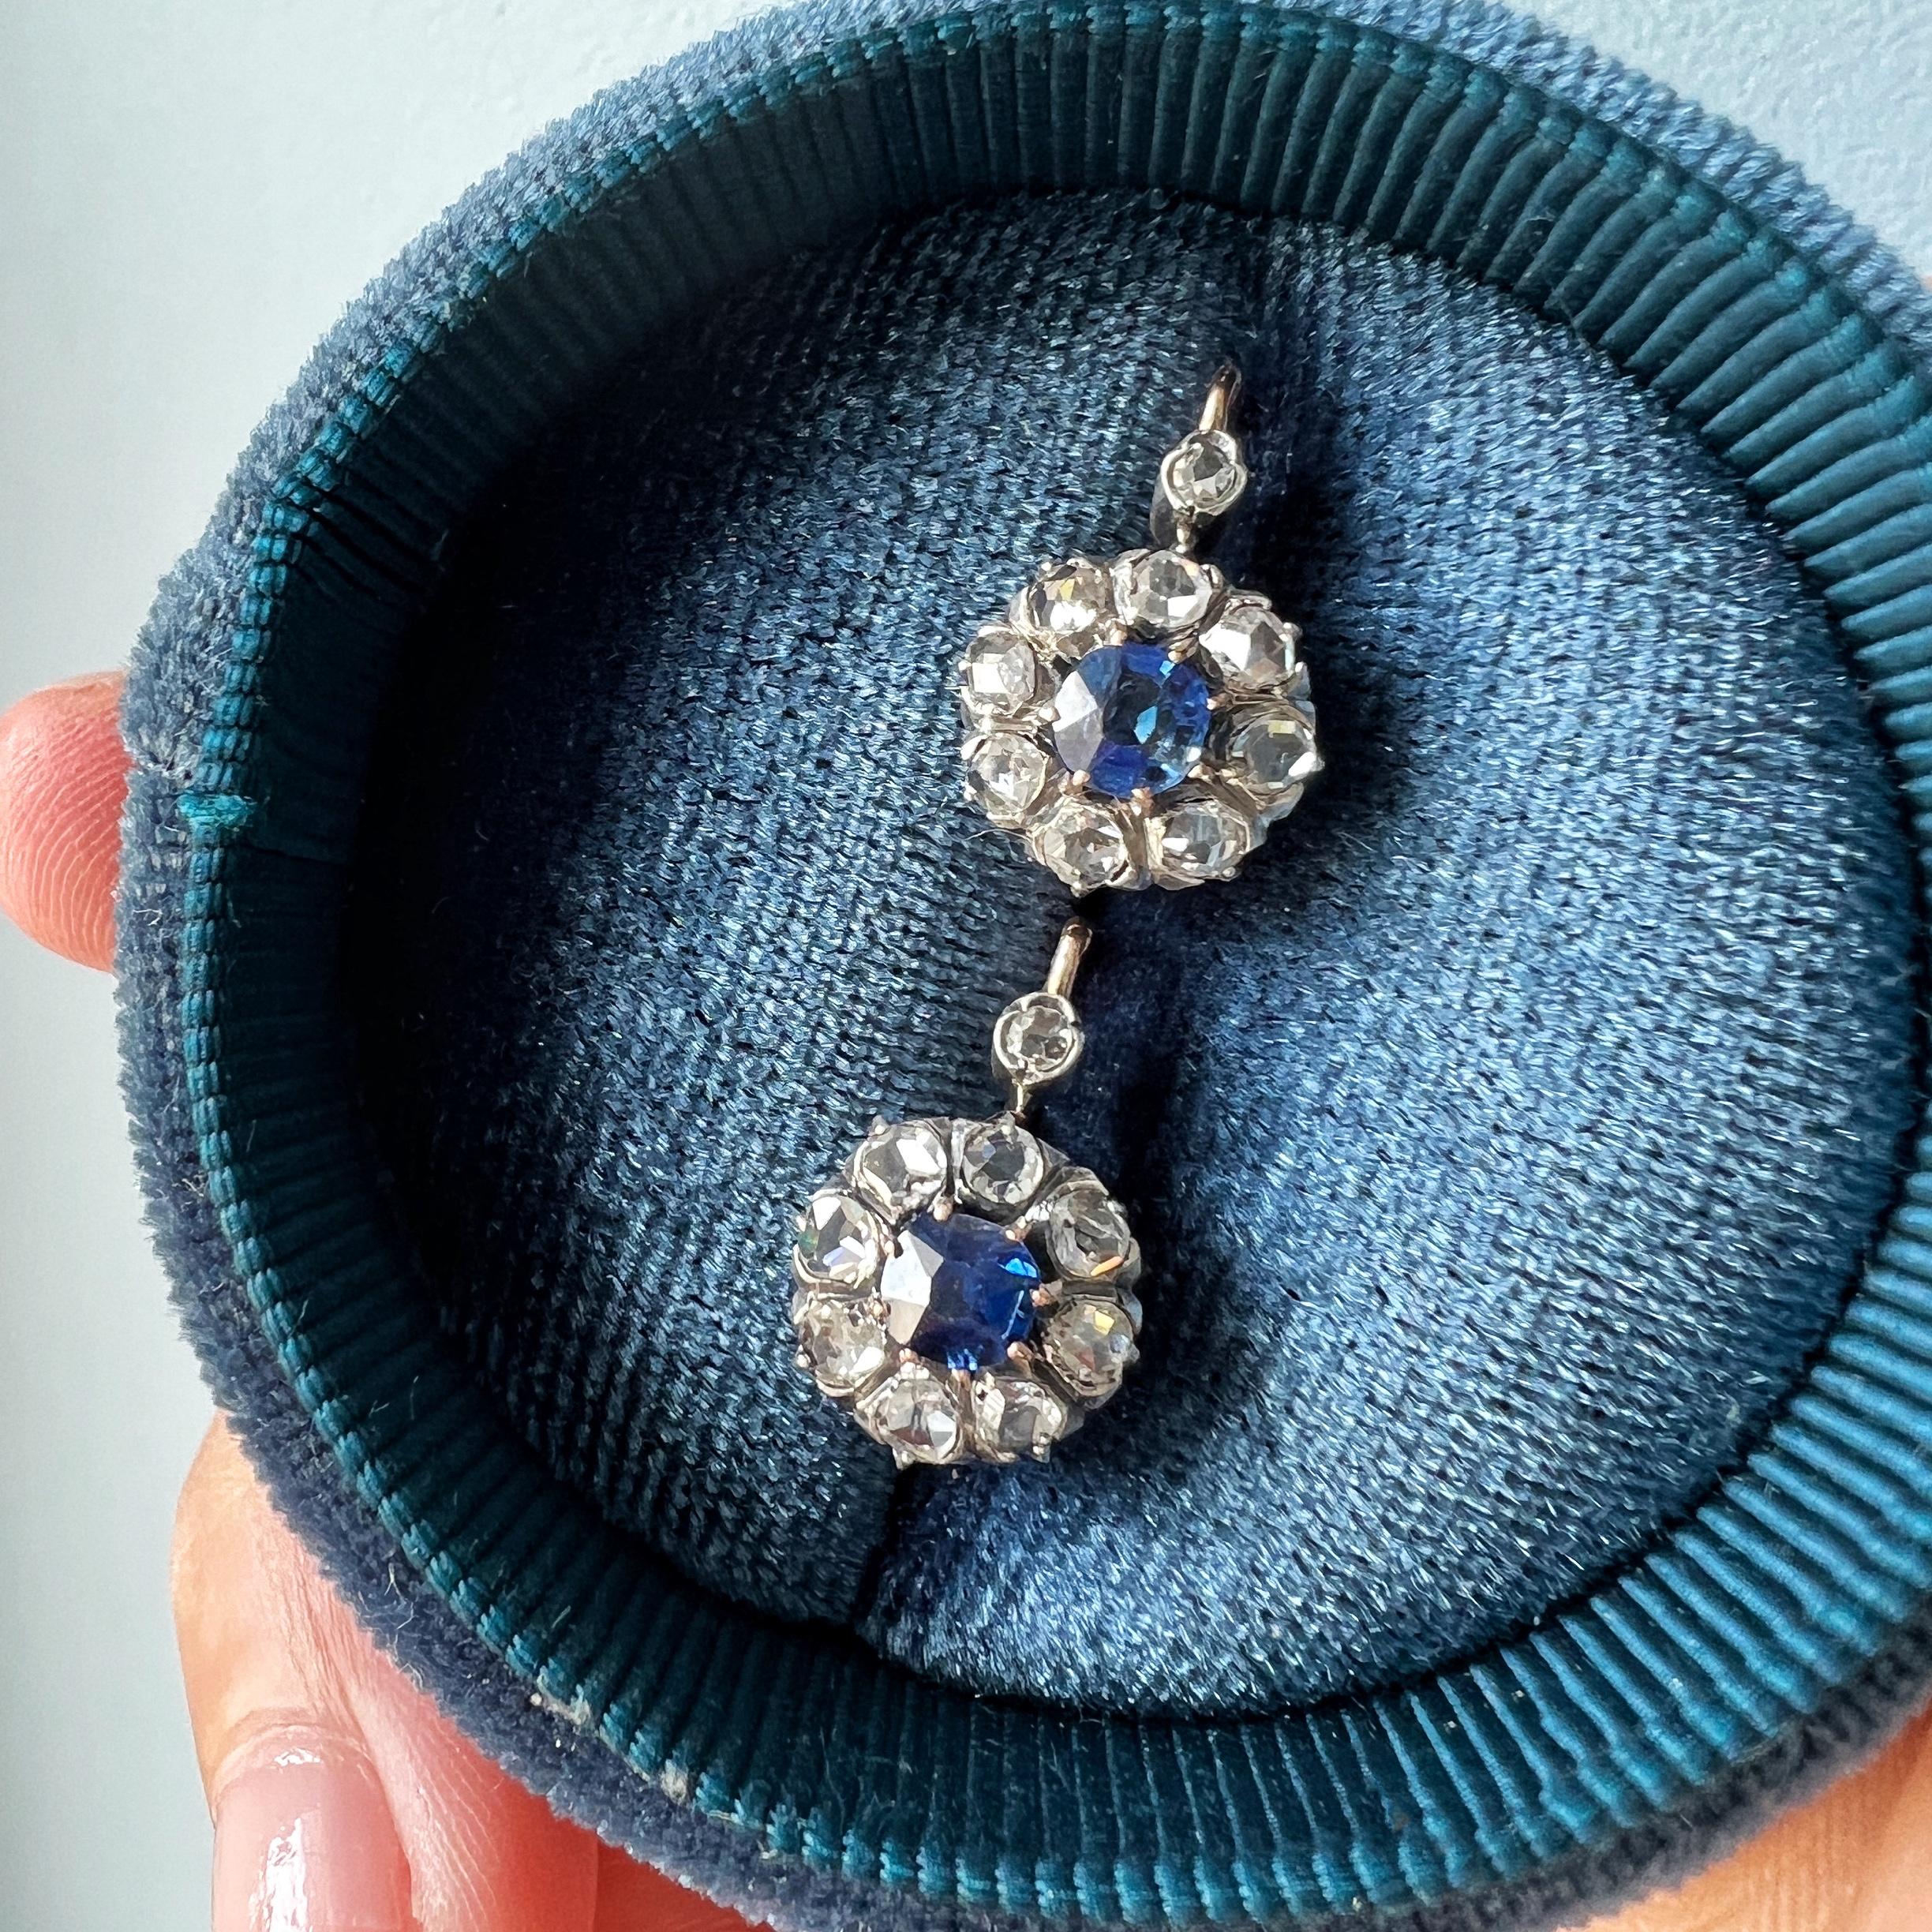 For sale a beautiful pair of French antique diamond blue sapphire earrings in 18K gold, dated back to the late 19th century, the Victorian era.

Each side of the earrings features a cluster design of a flower made of a halo-styled rose cut diamonds